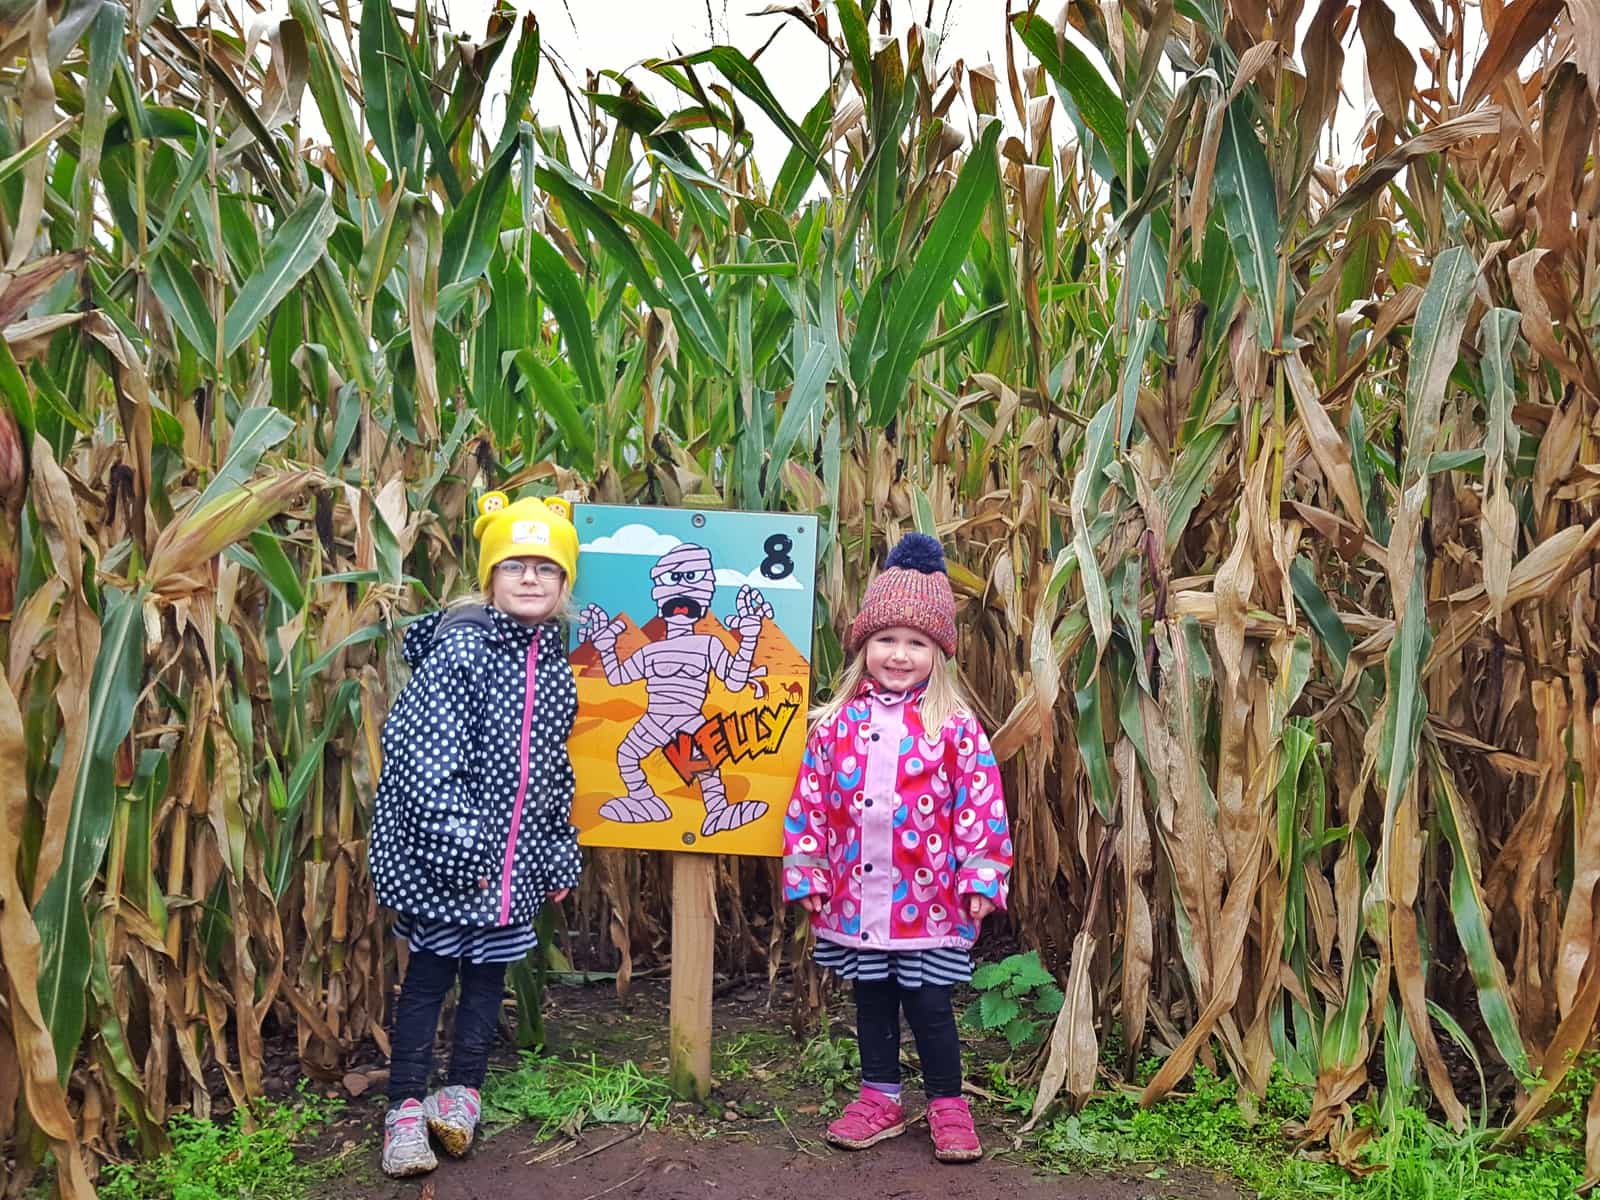 National Forest Adventure Farm | Situated in Staffordshire in the West Midlands, UK - the National Forest Adventure Farm is the perfect day out for children and families who like to be outdoors. On Halloween, pick your own pumpkin from the pumpkin patch to take home with you. Plus, see all the other scary goings on. #Halloween #WestMIdlands #NationalForest #familytravel